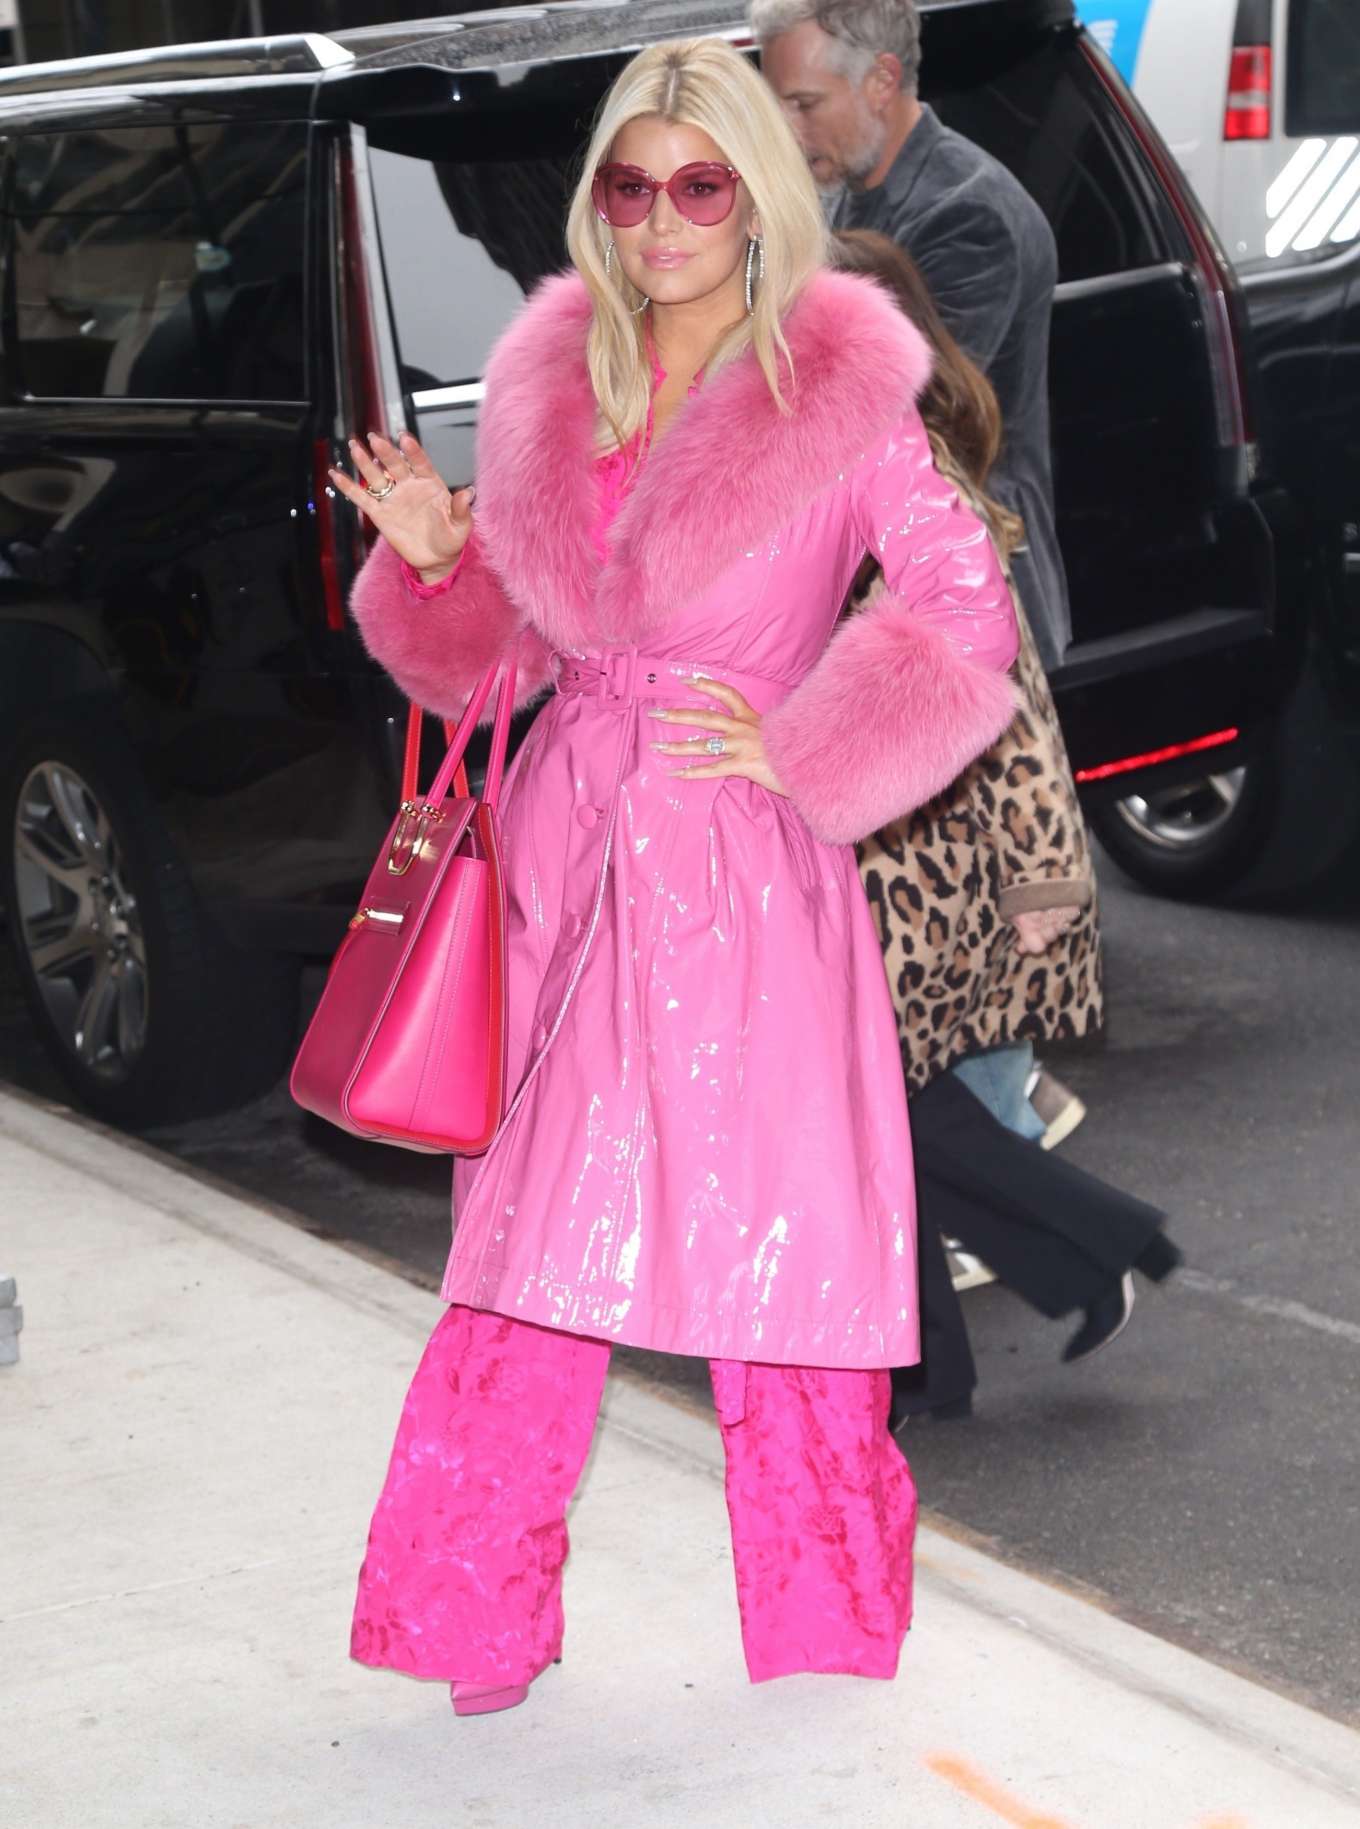 Jessica Simpson in Pink Outfit at BuzzFeed in New York-03 | GotCeleb